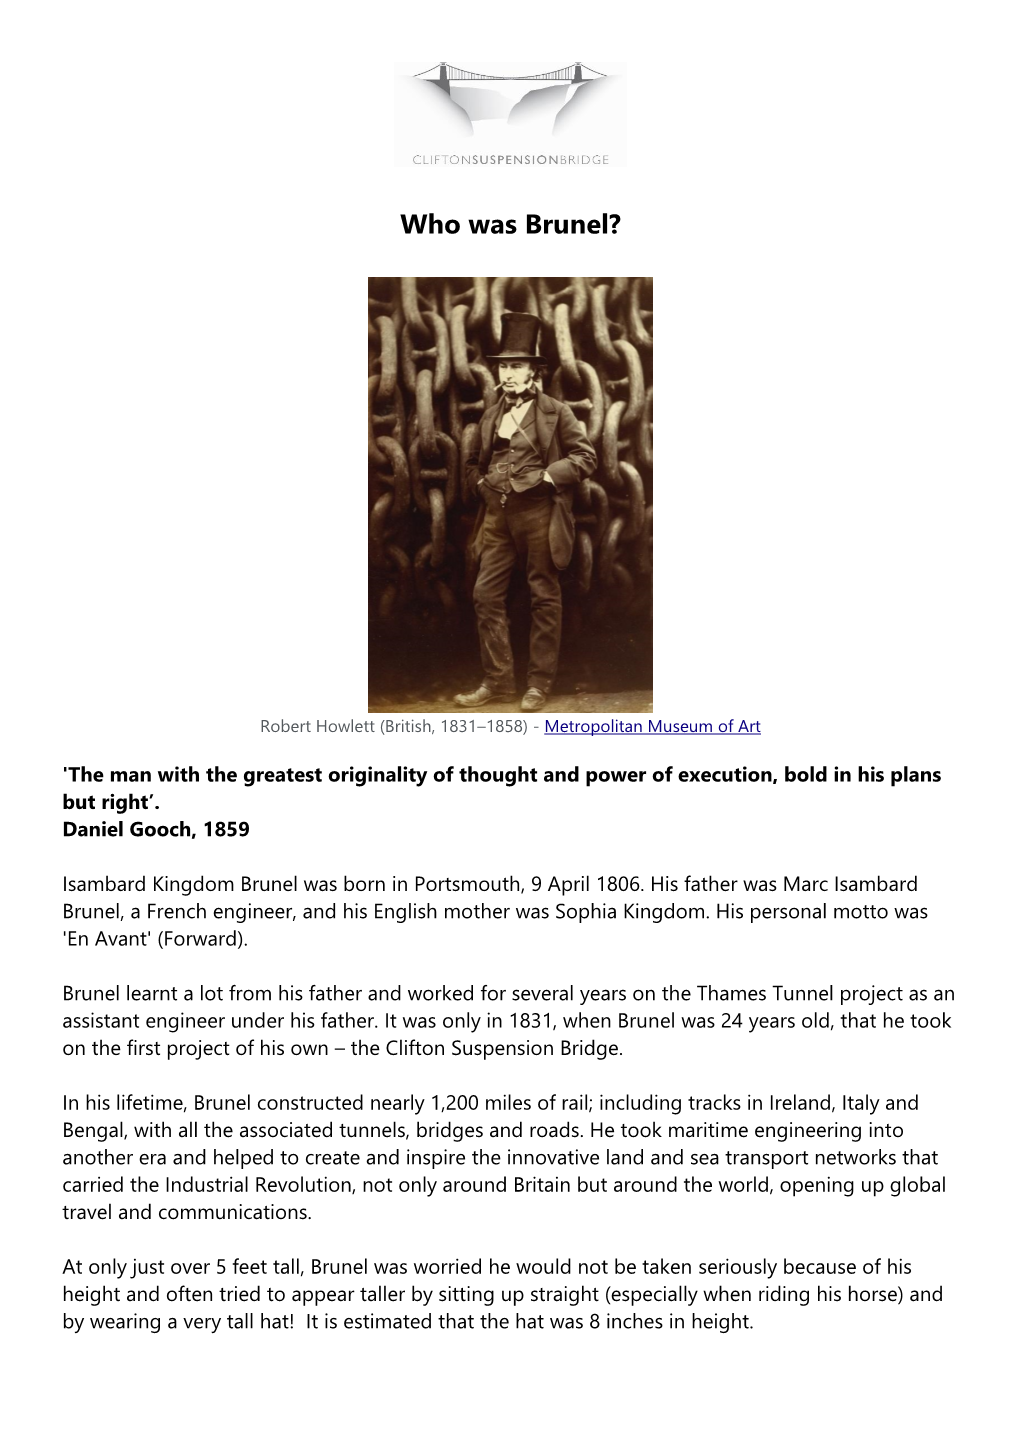 Download: Who Was Brunel – Teaching Resource